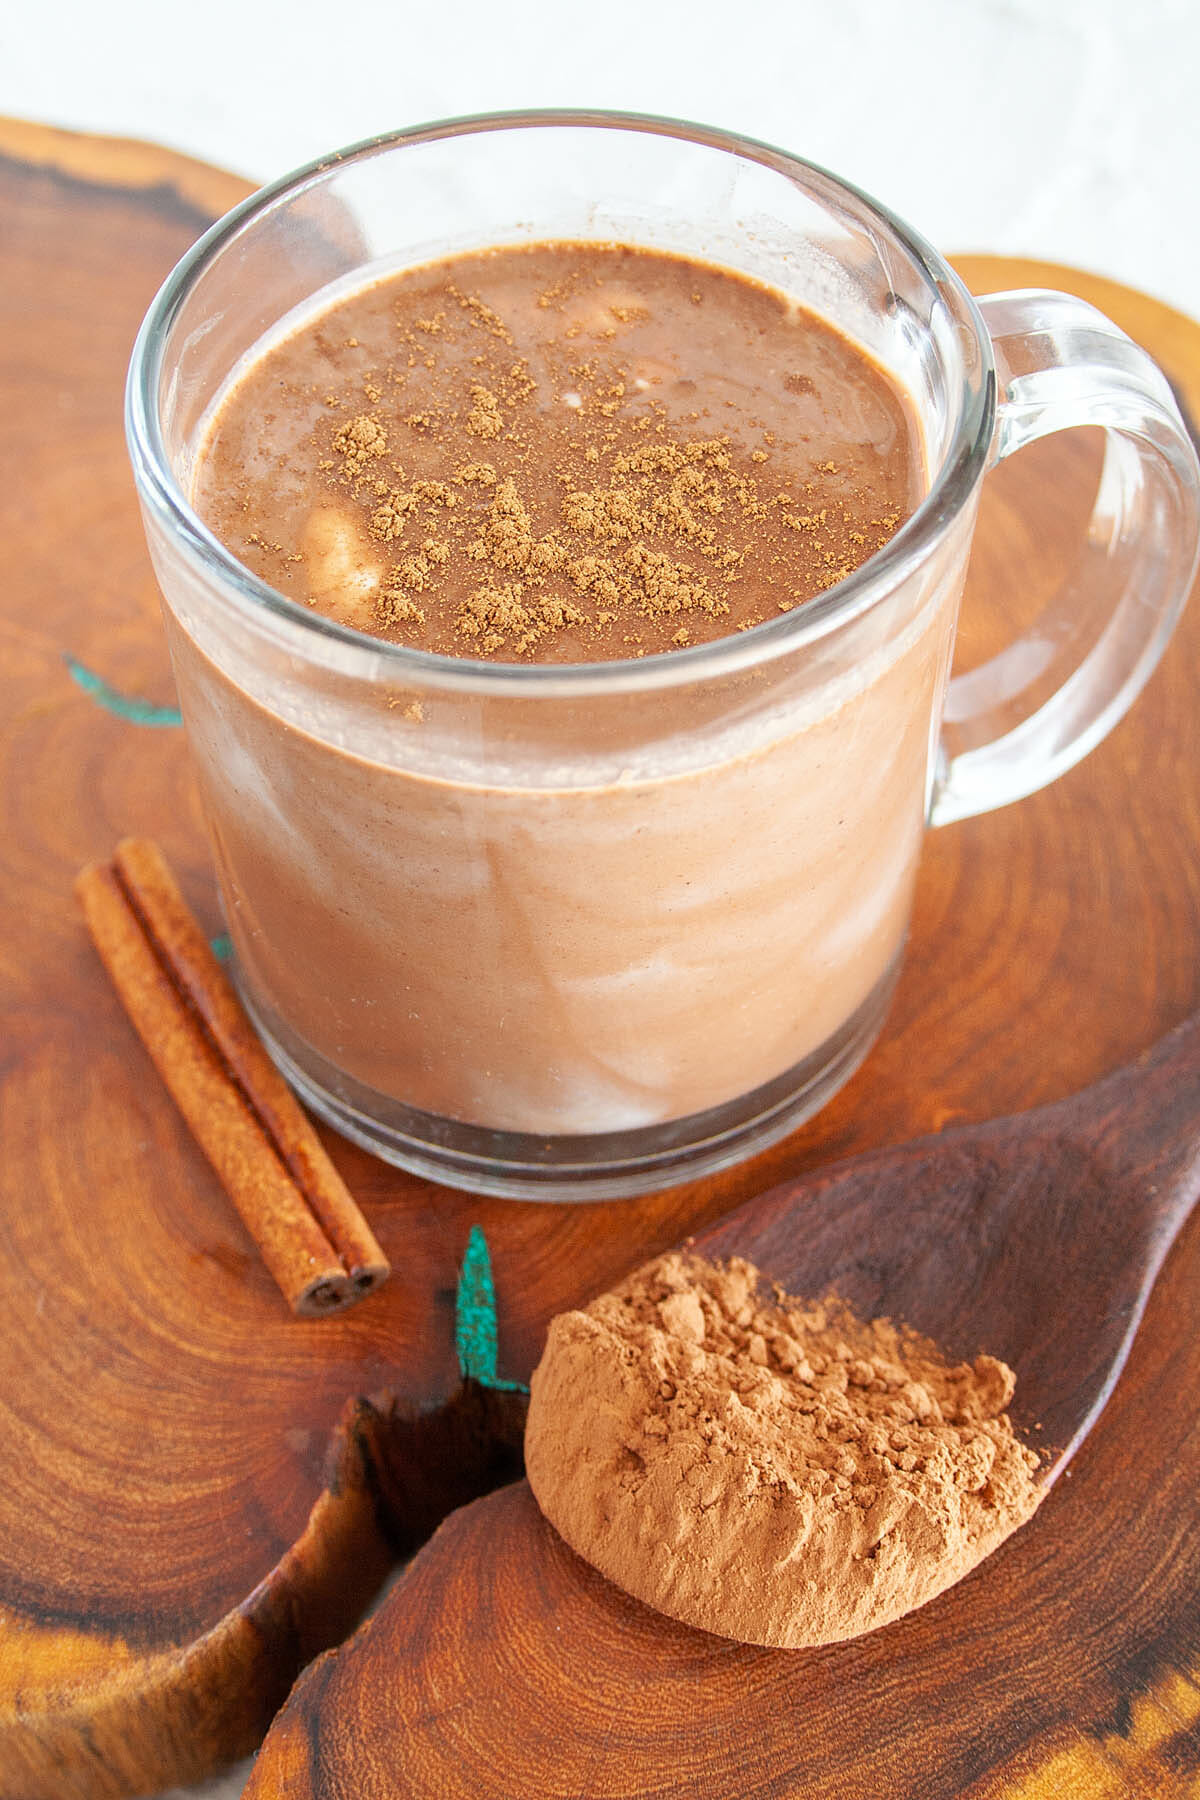 Spiced Hot Cocoa in mug on cutting board with spoonful of cacao powder and cinnamon stick.